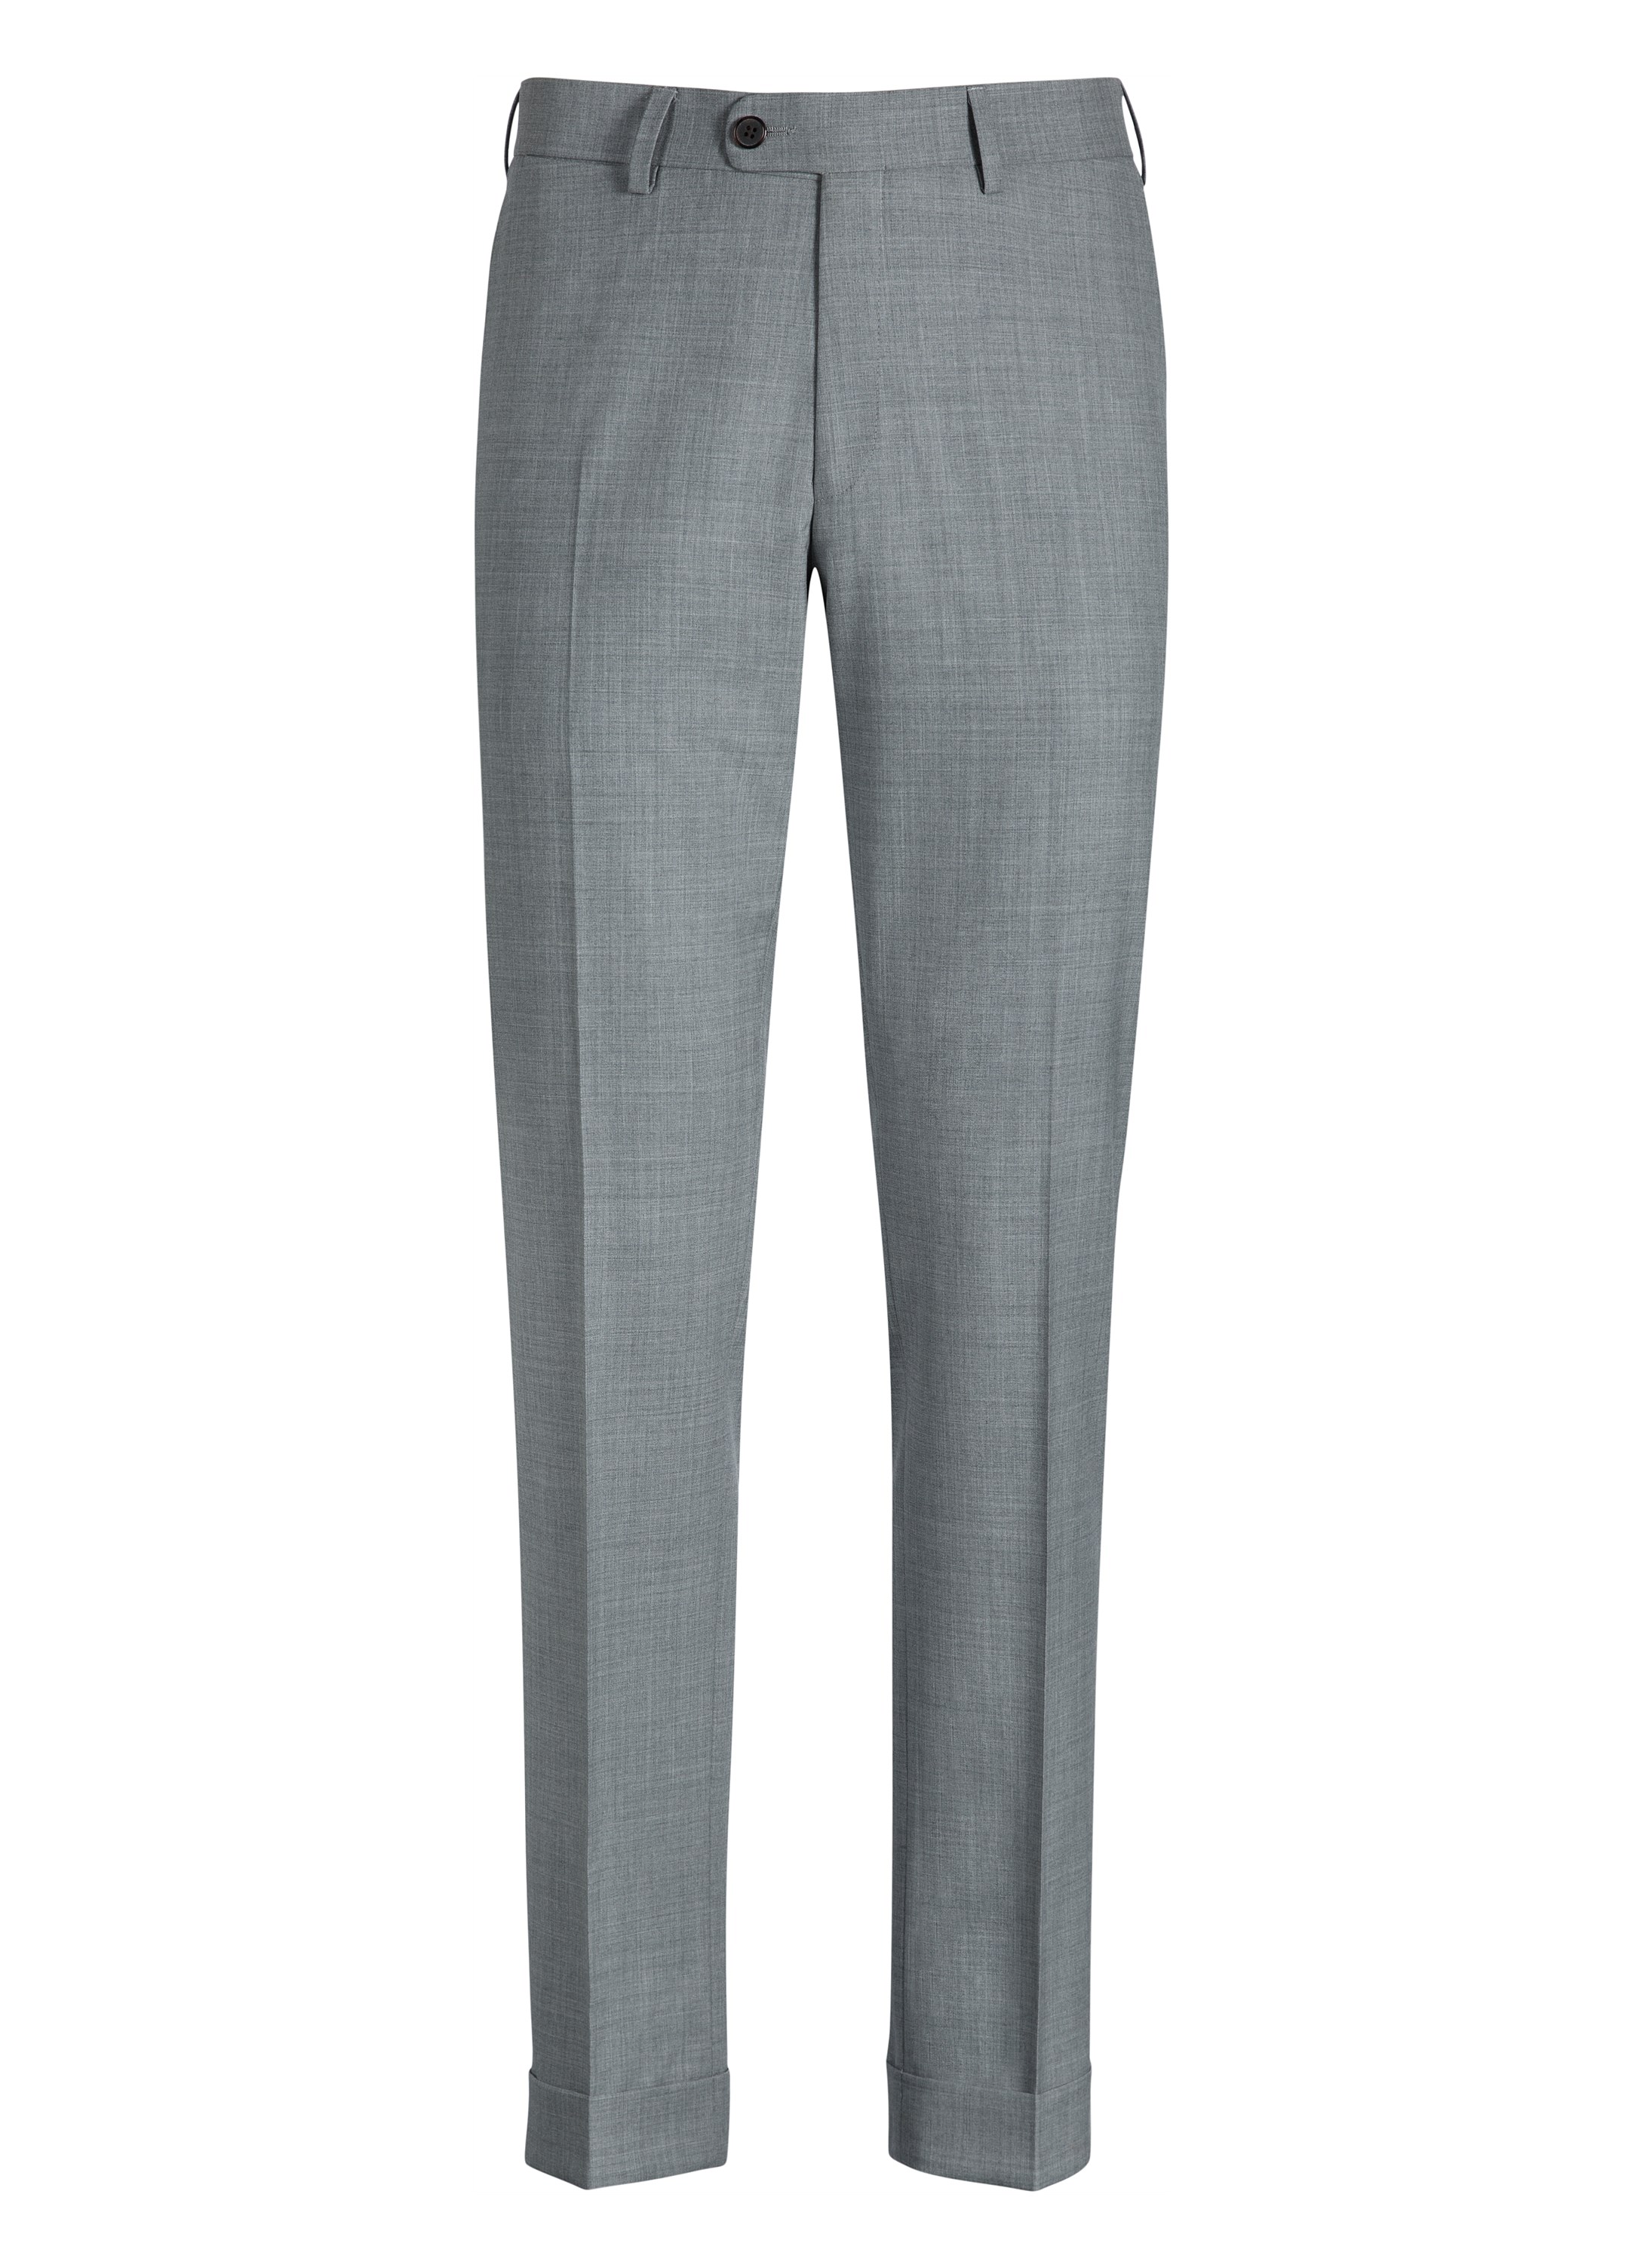 Light Grey Trousers B777i | Suitsupply Online Store